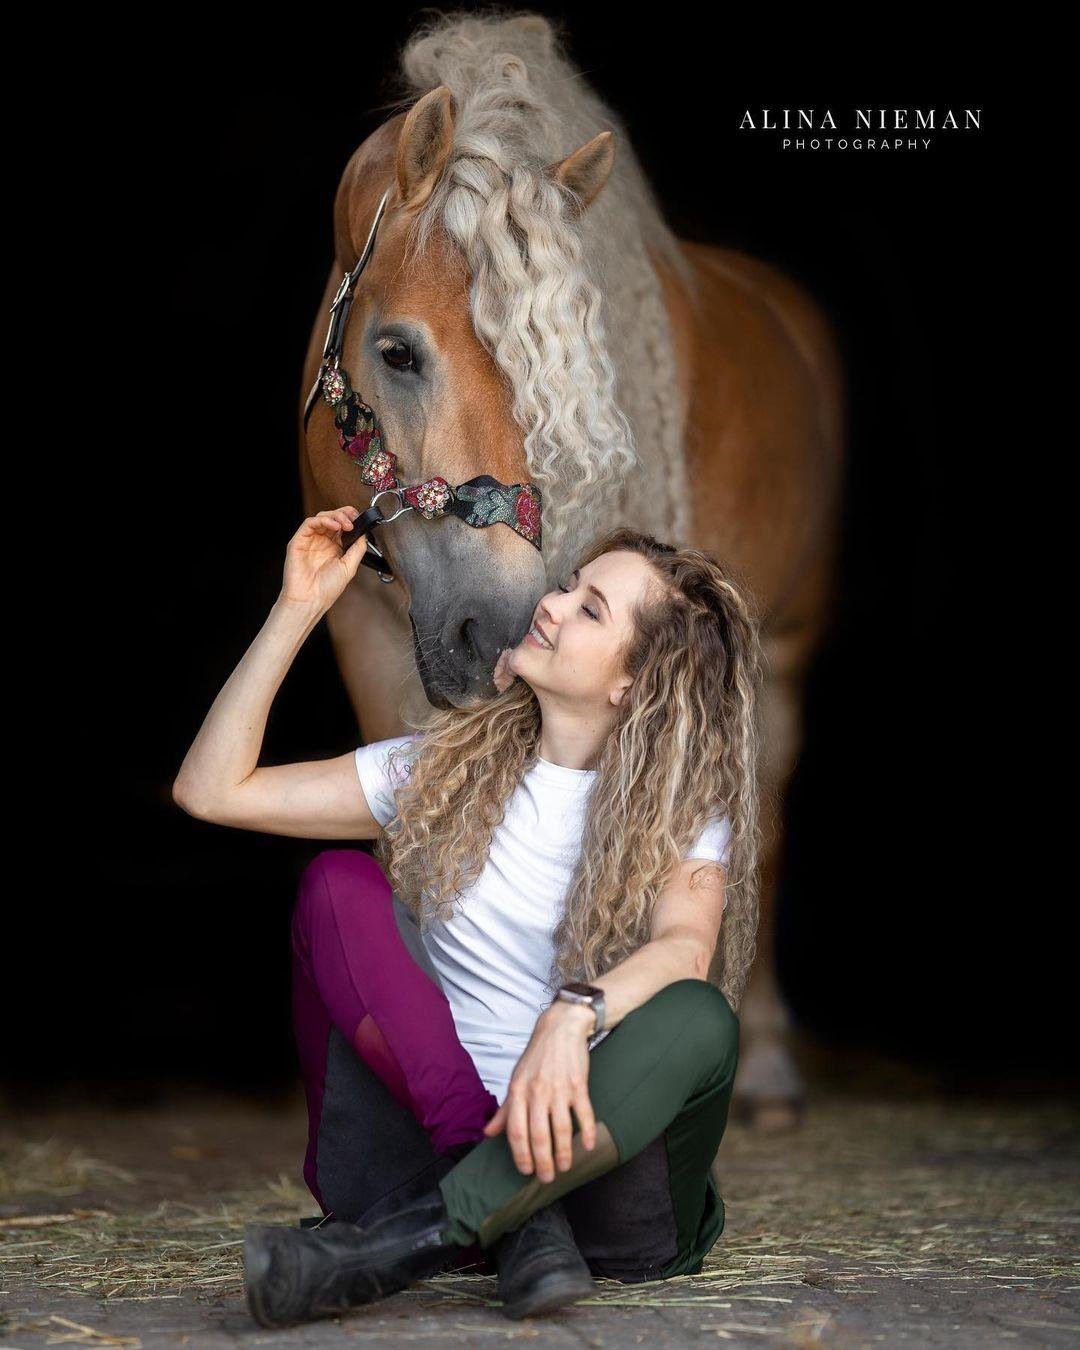 The girl shared photos with her horse from a fairy